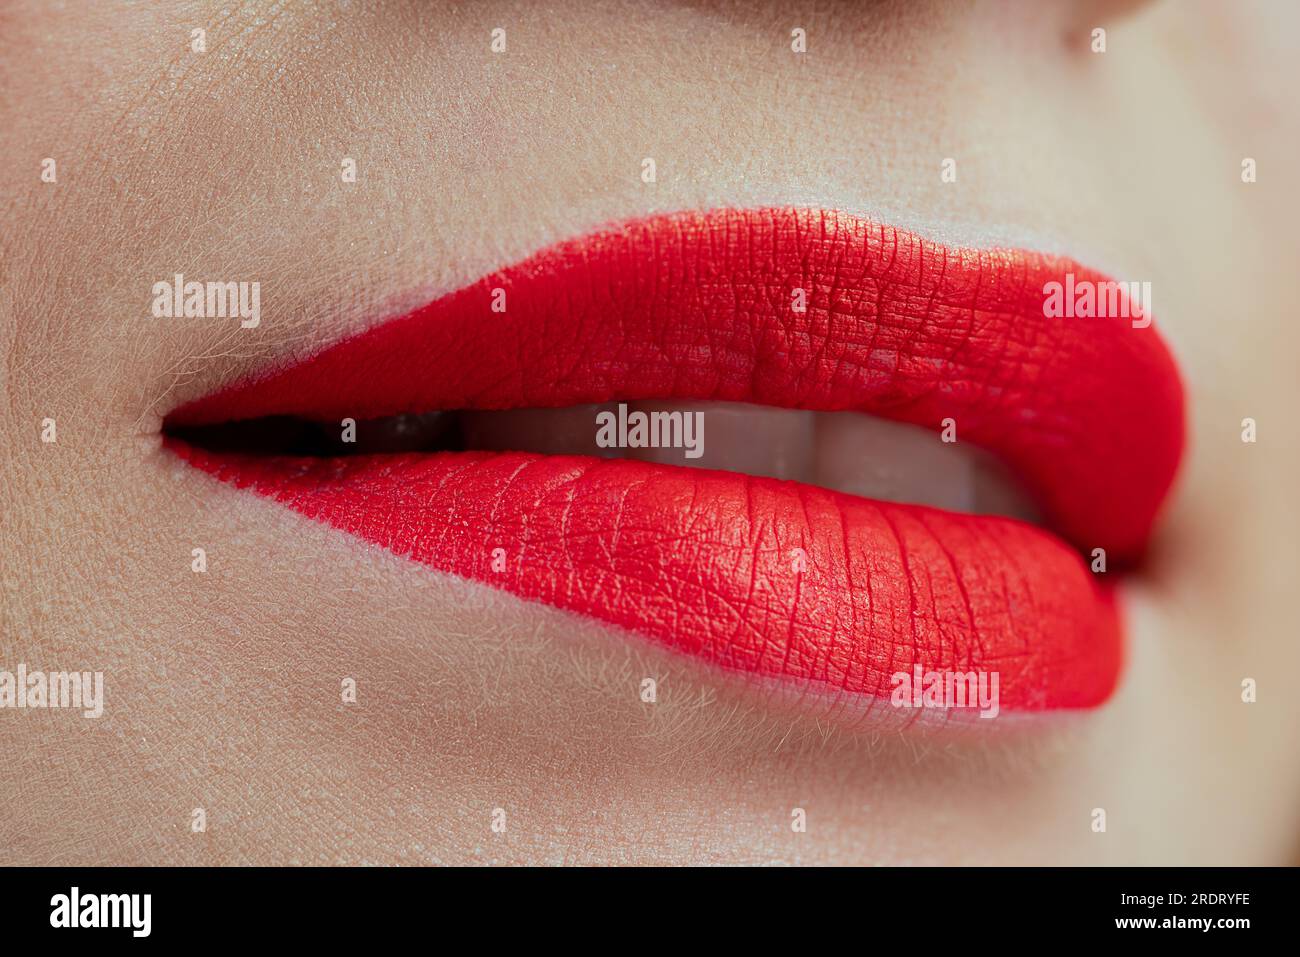 Woman red lips close-up view Stock Photo